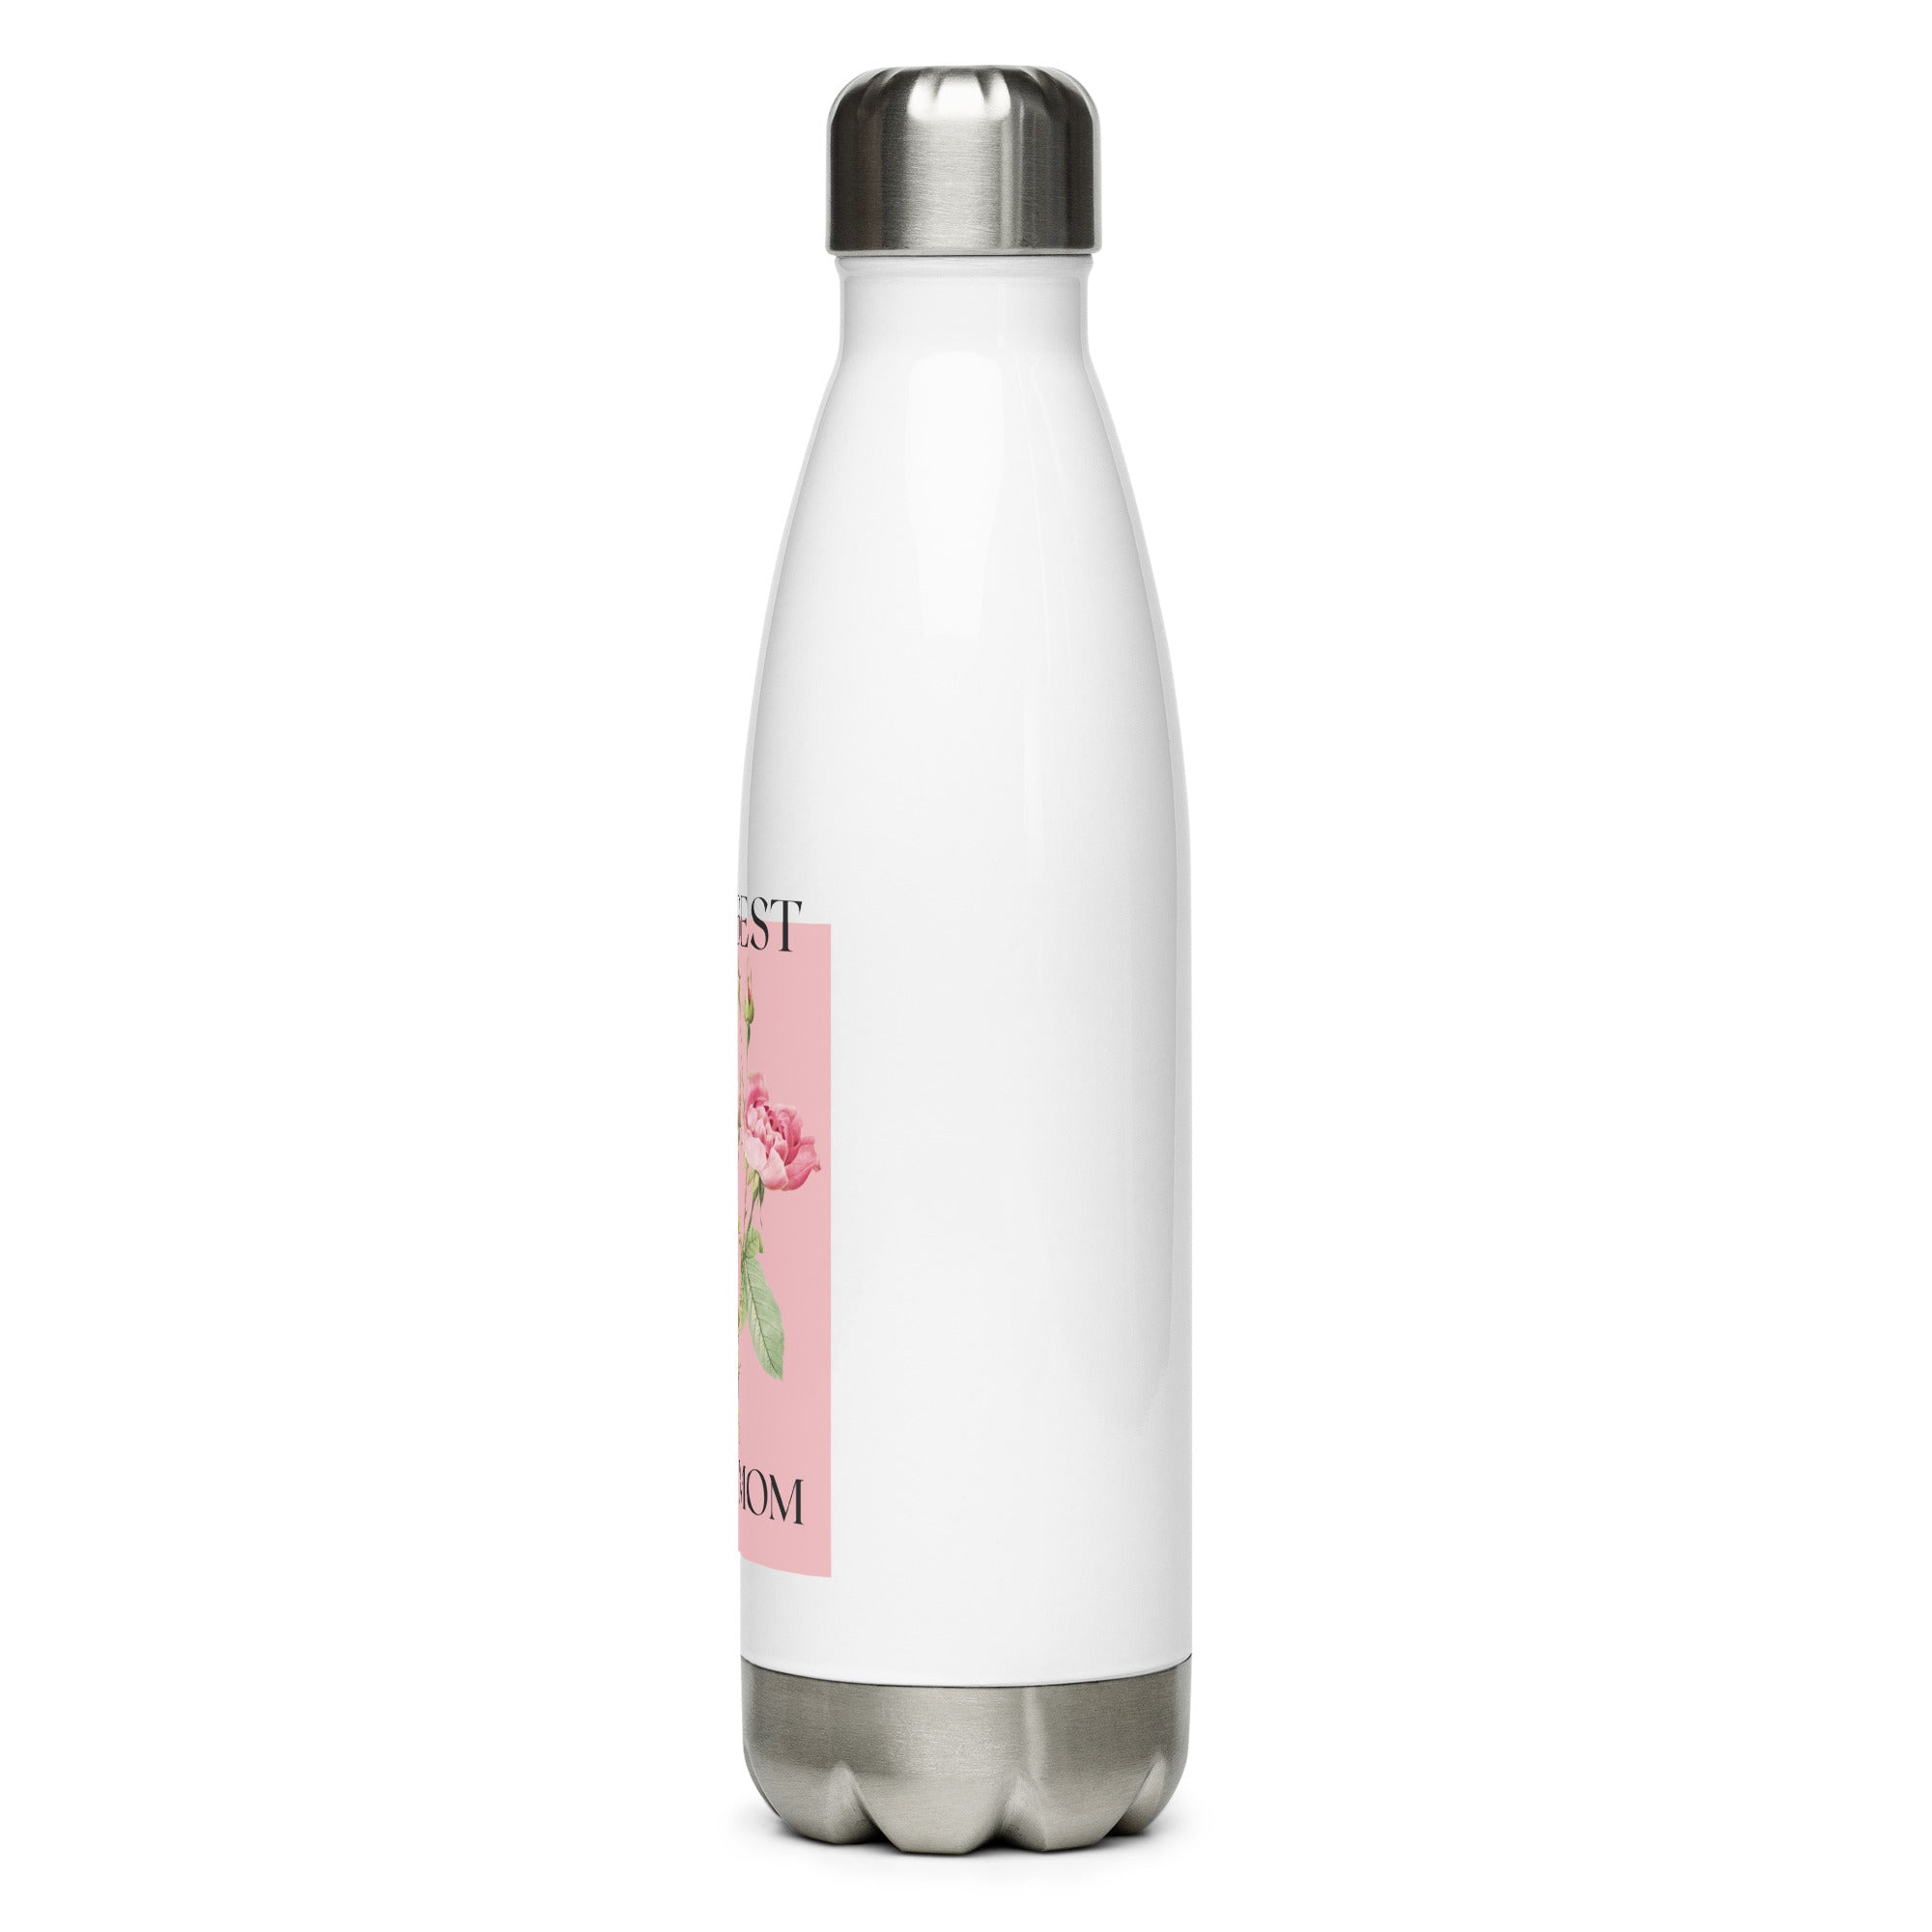 Stainless steel water bottle - the best Mom